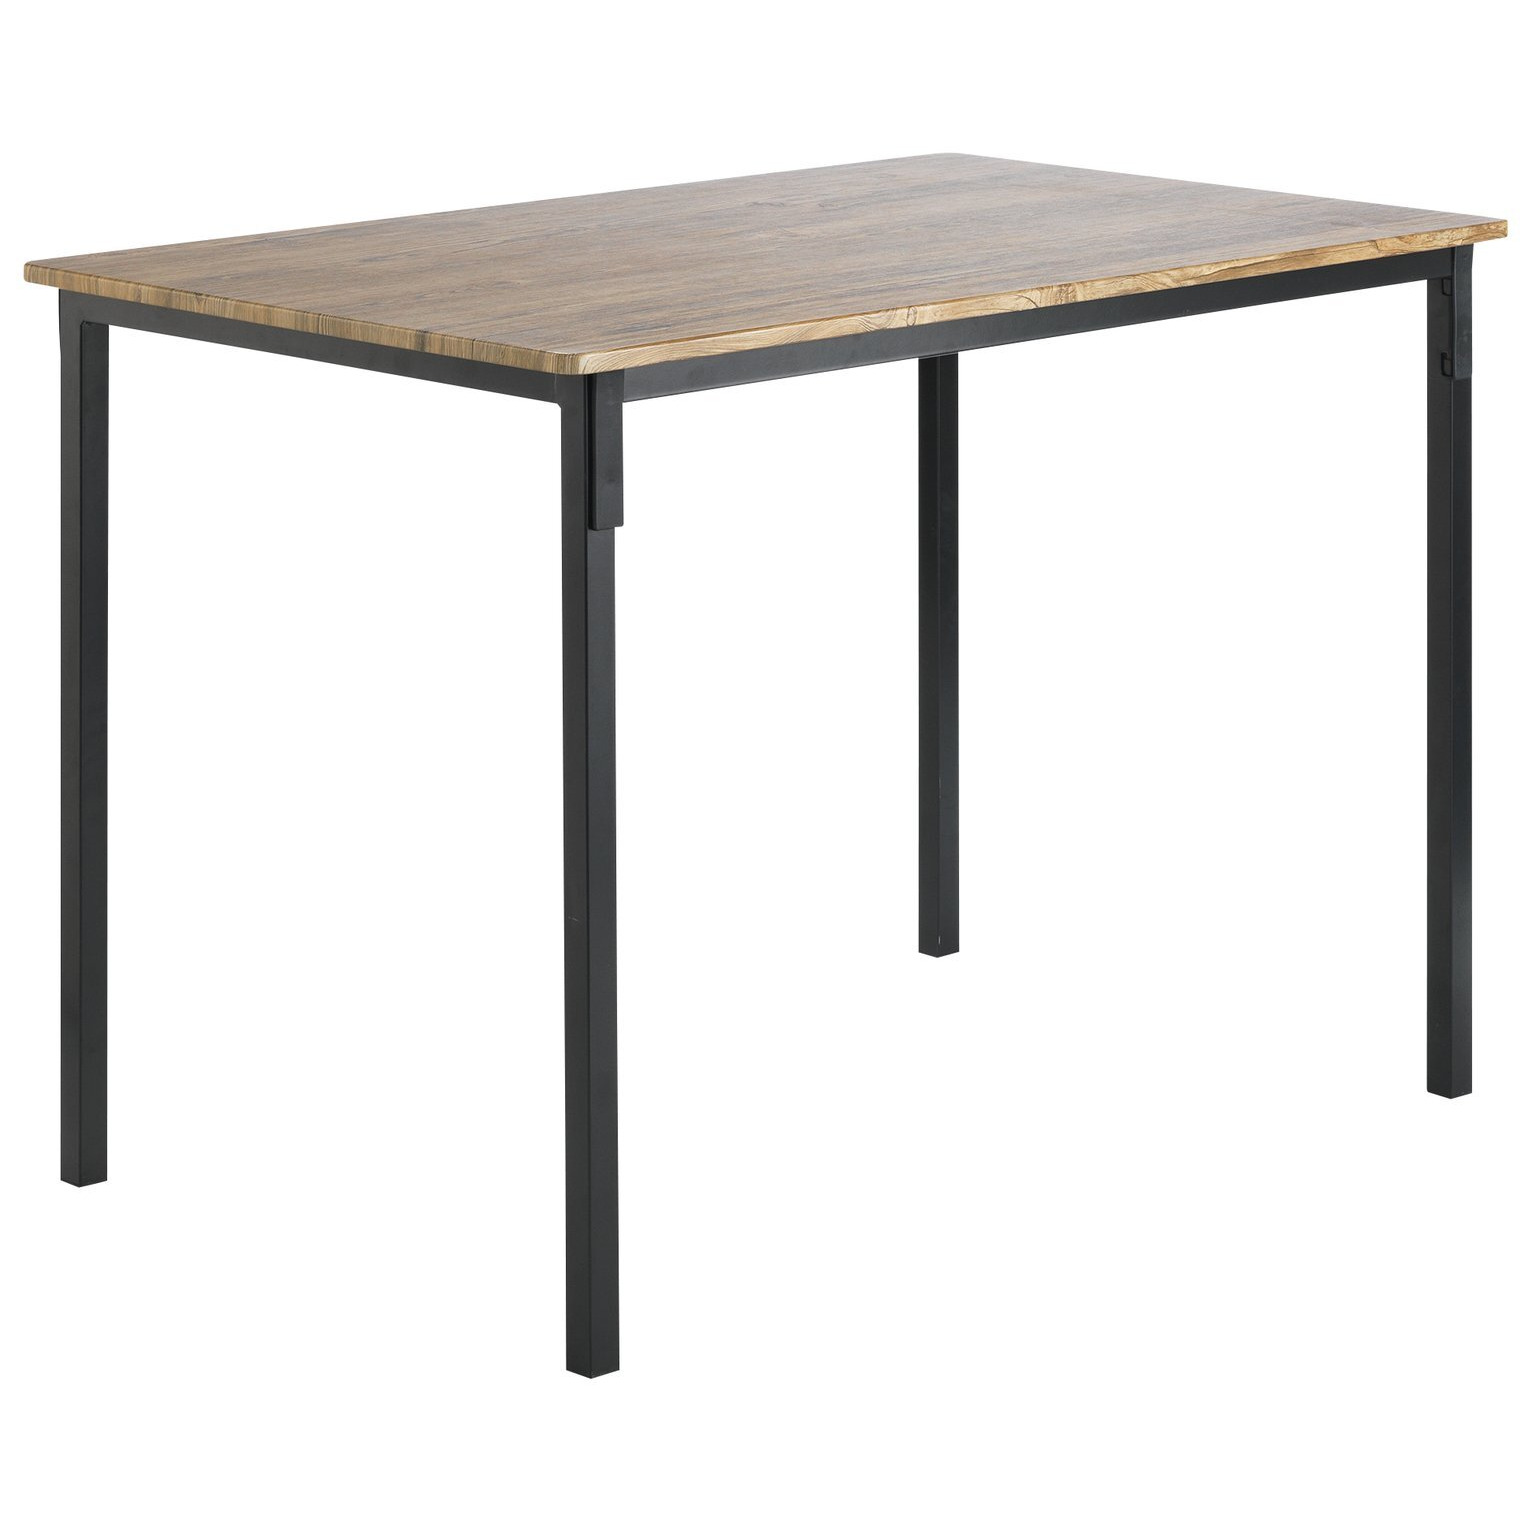 Argos Home Bolitzo 4 Seater Dining Table - Black - image 1